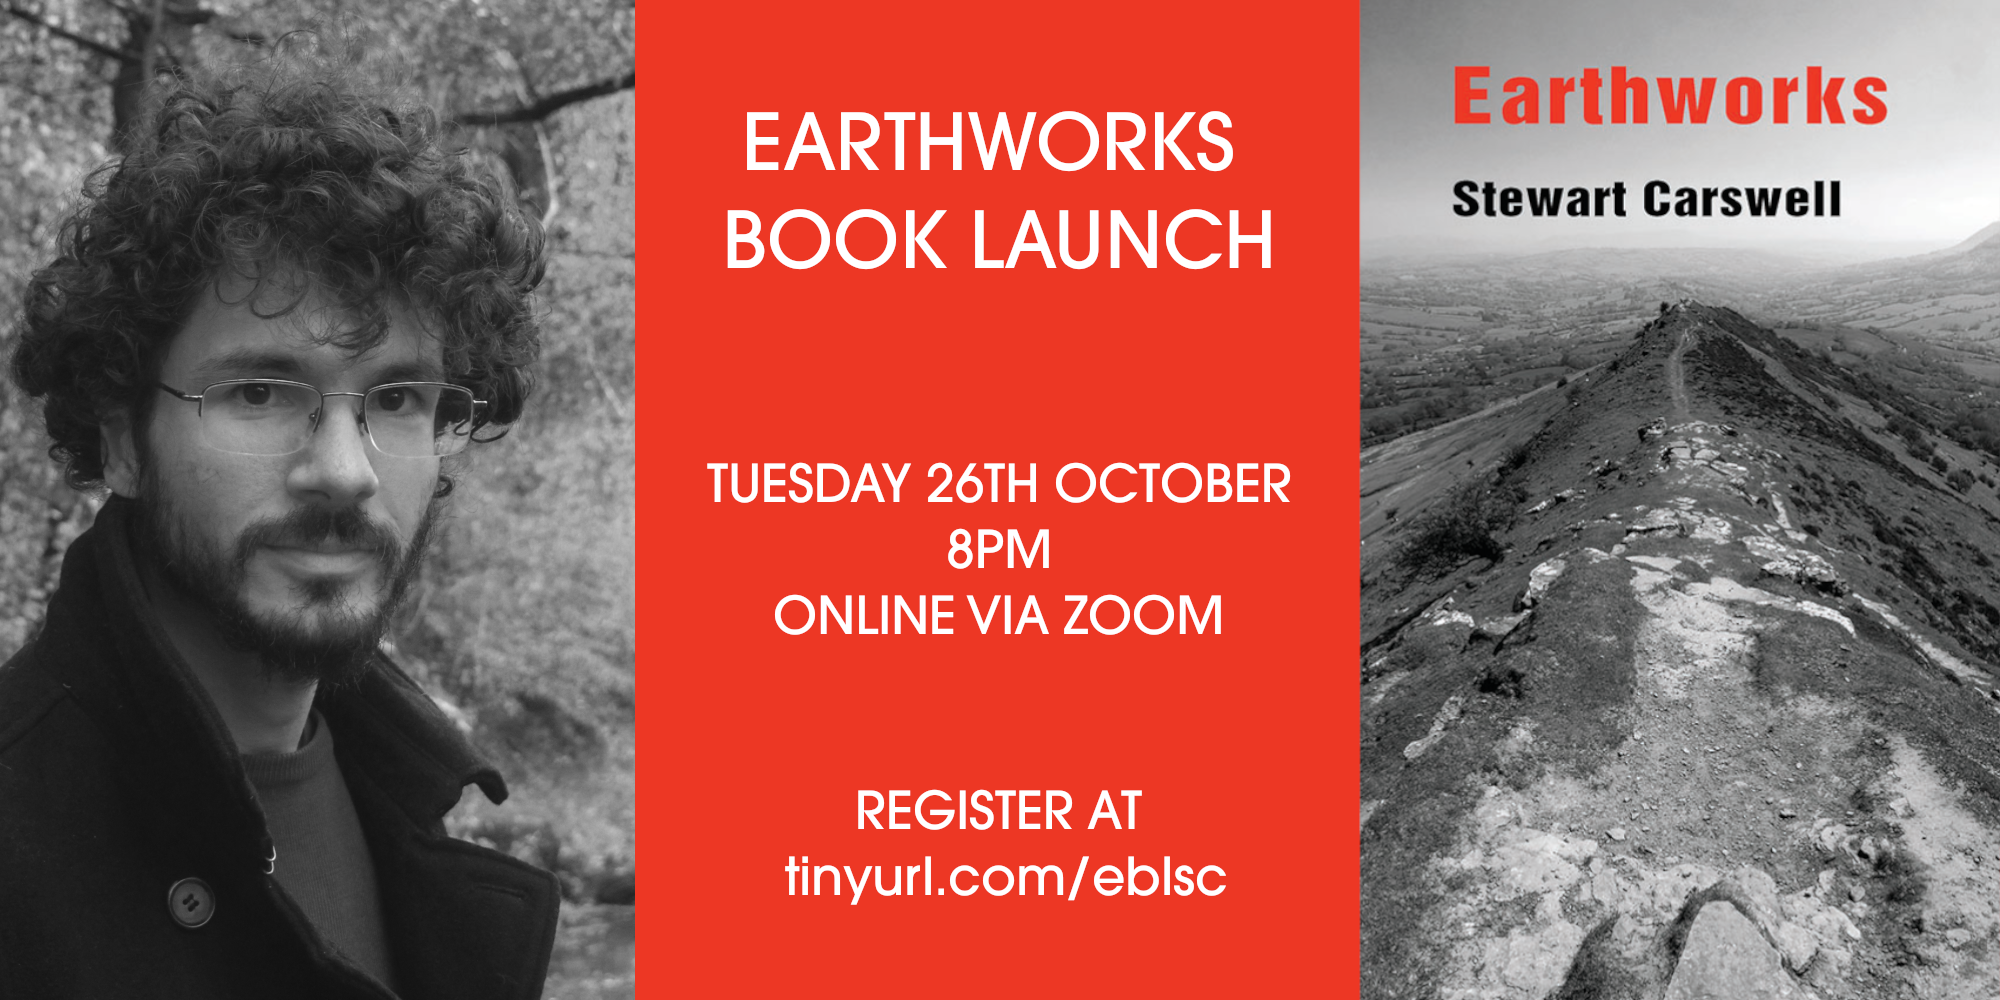 Event poster for Earthworks book launch. Triptych of author photo, event details, and book cover